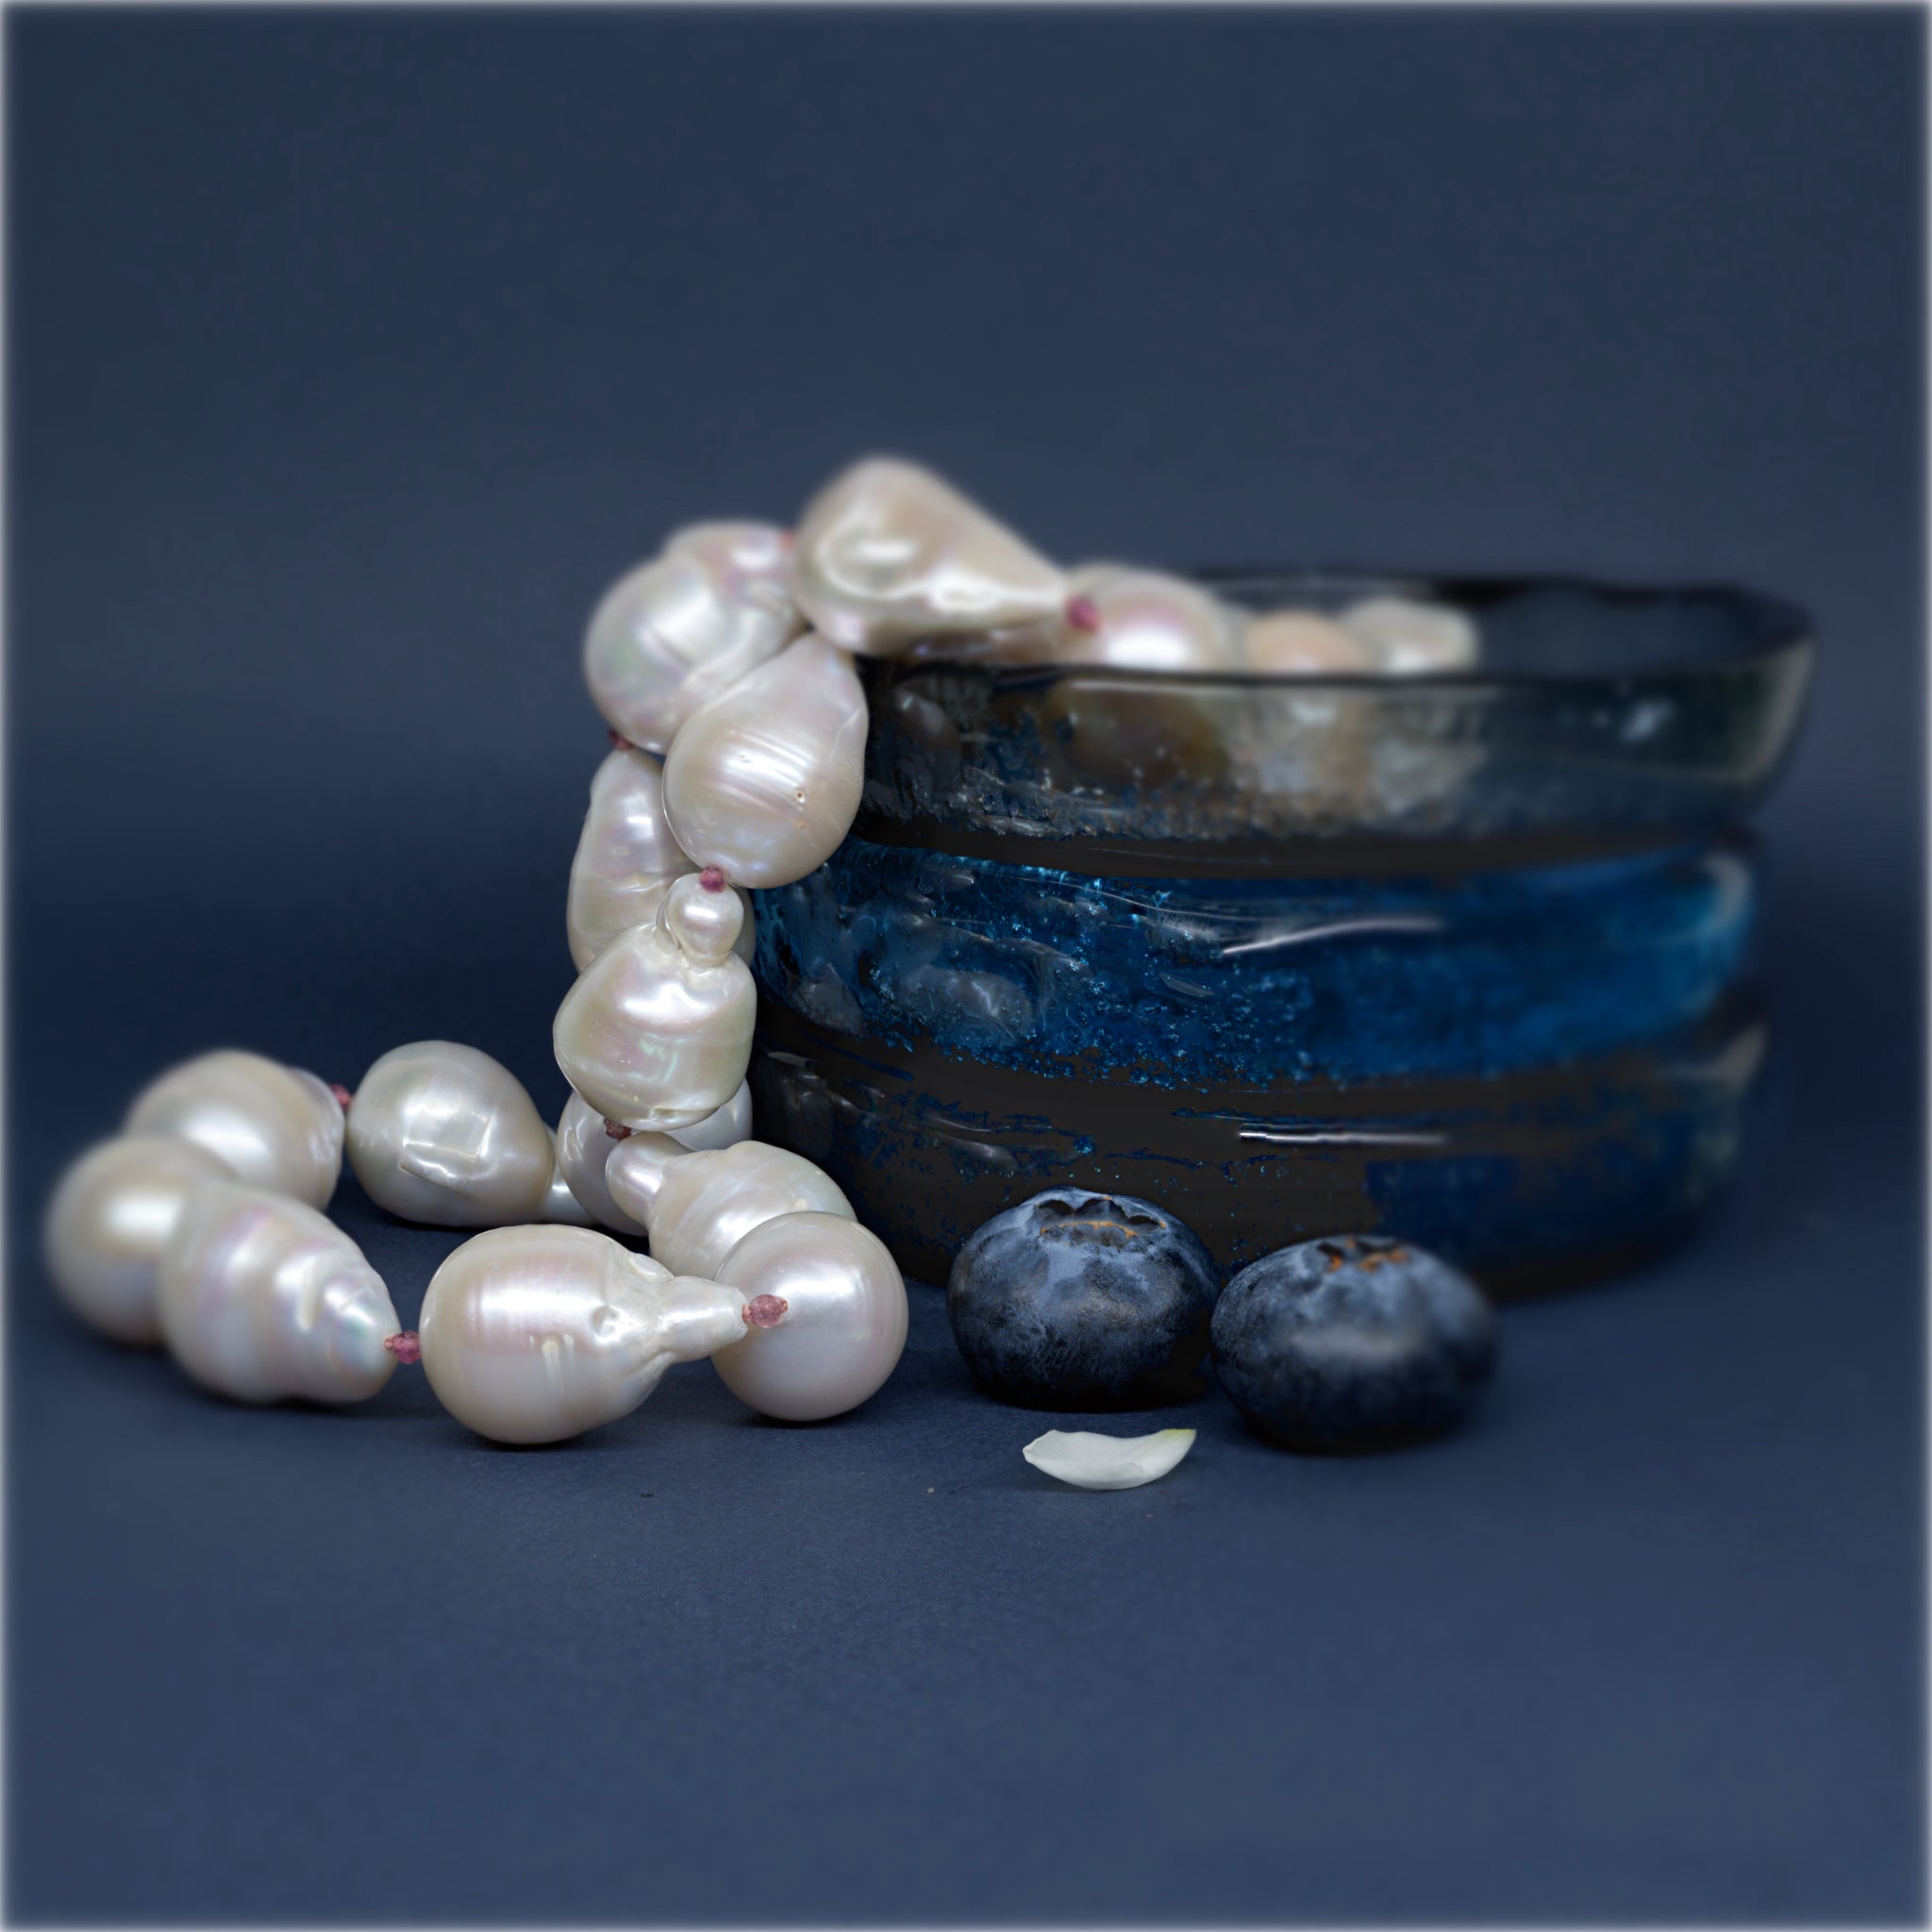 pink baroque pearls and jewellery dishes